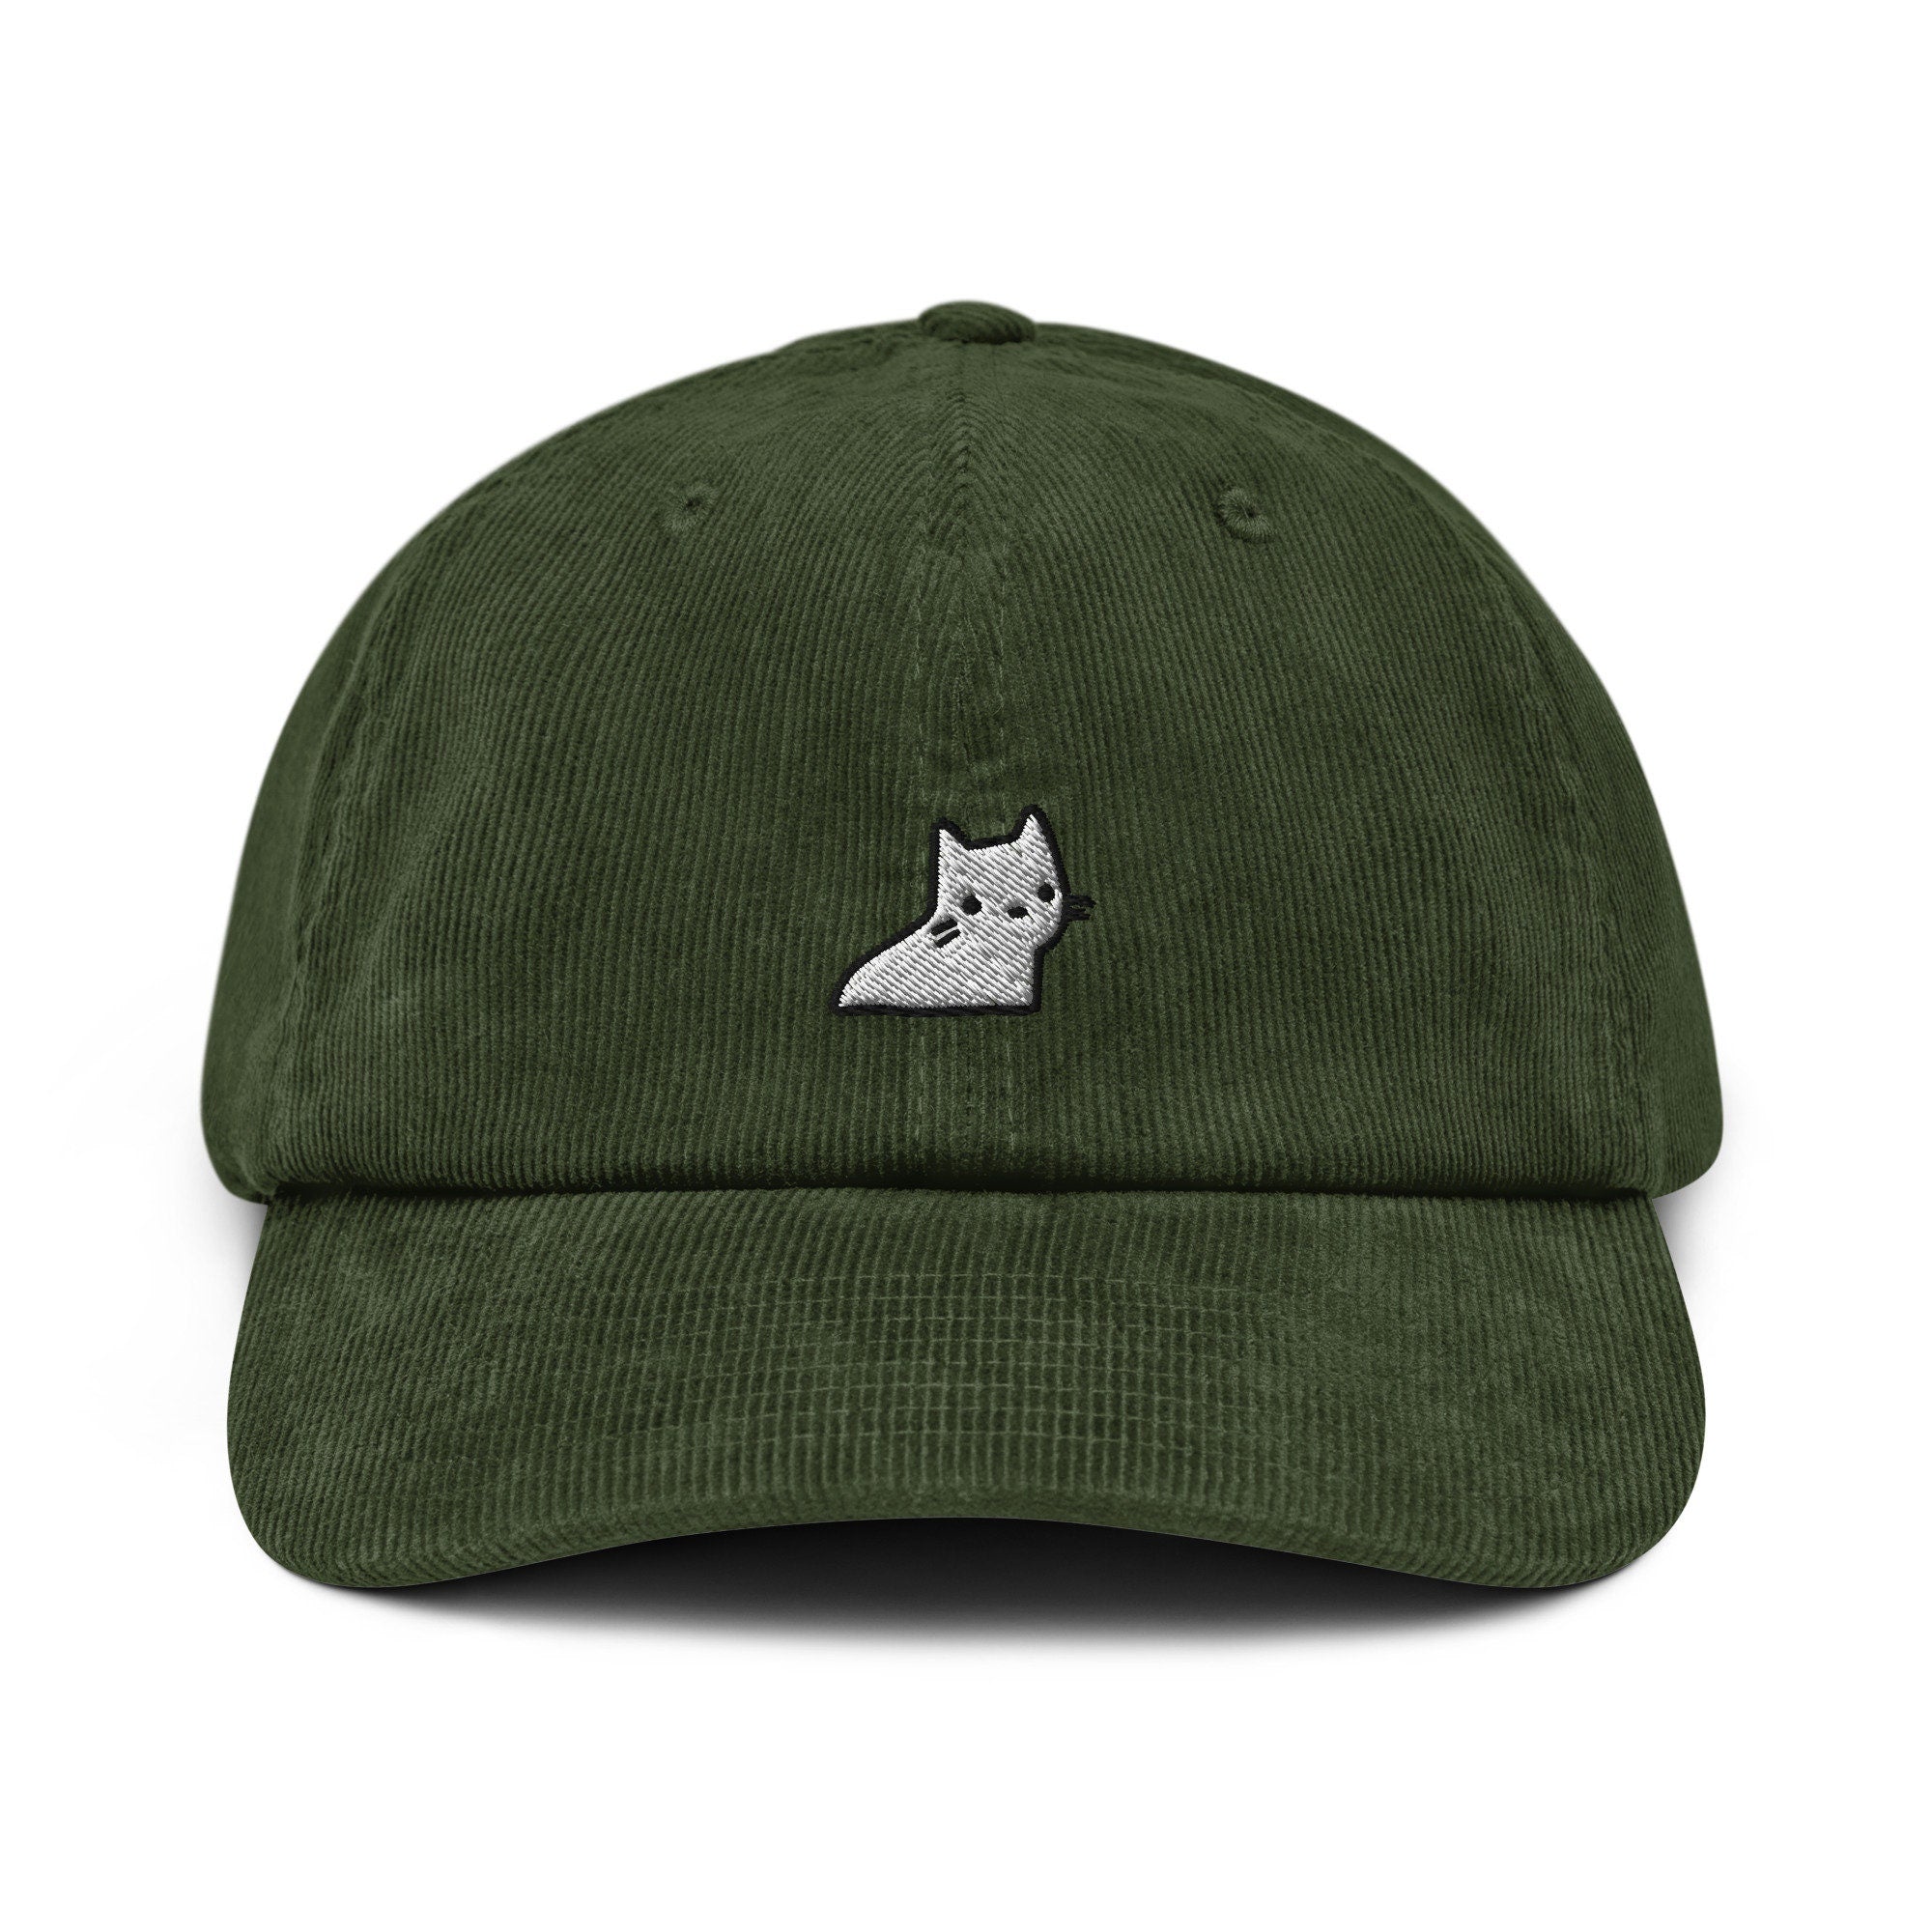 Ghost Cat Corduroy Hat, Handmade Embroidered Corduroy Dad Cap - Multiple Colors